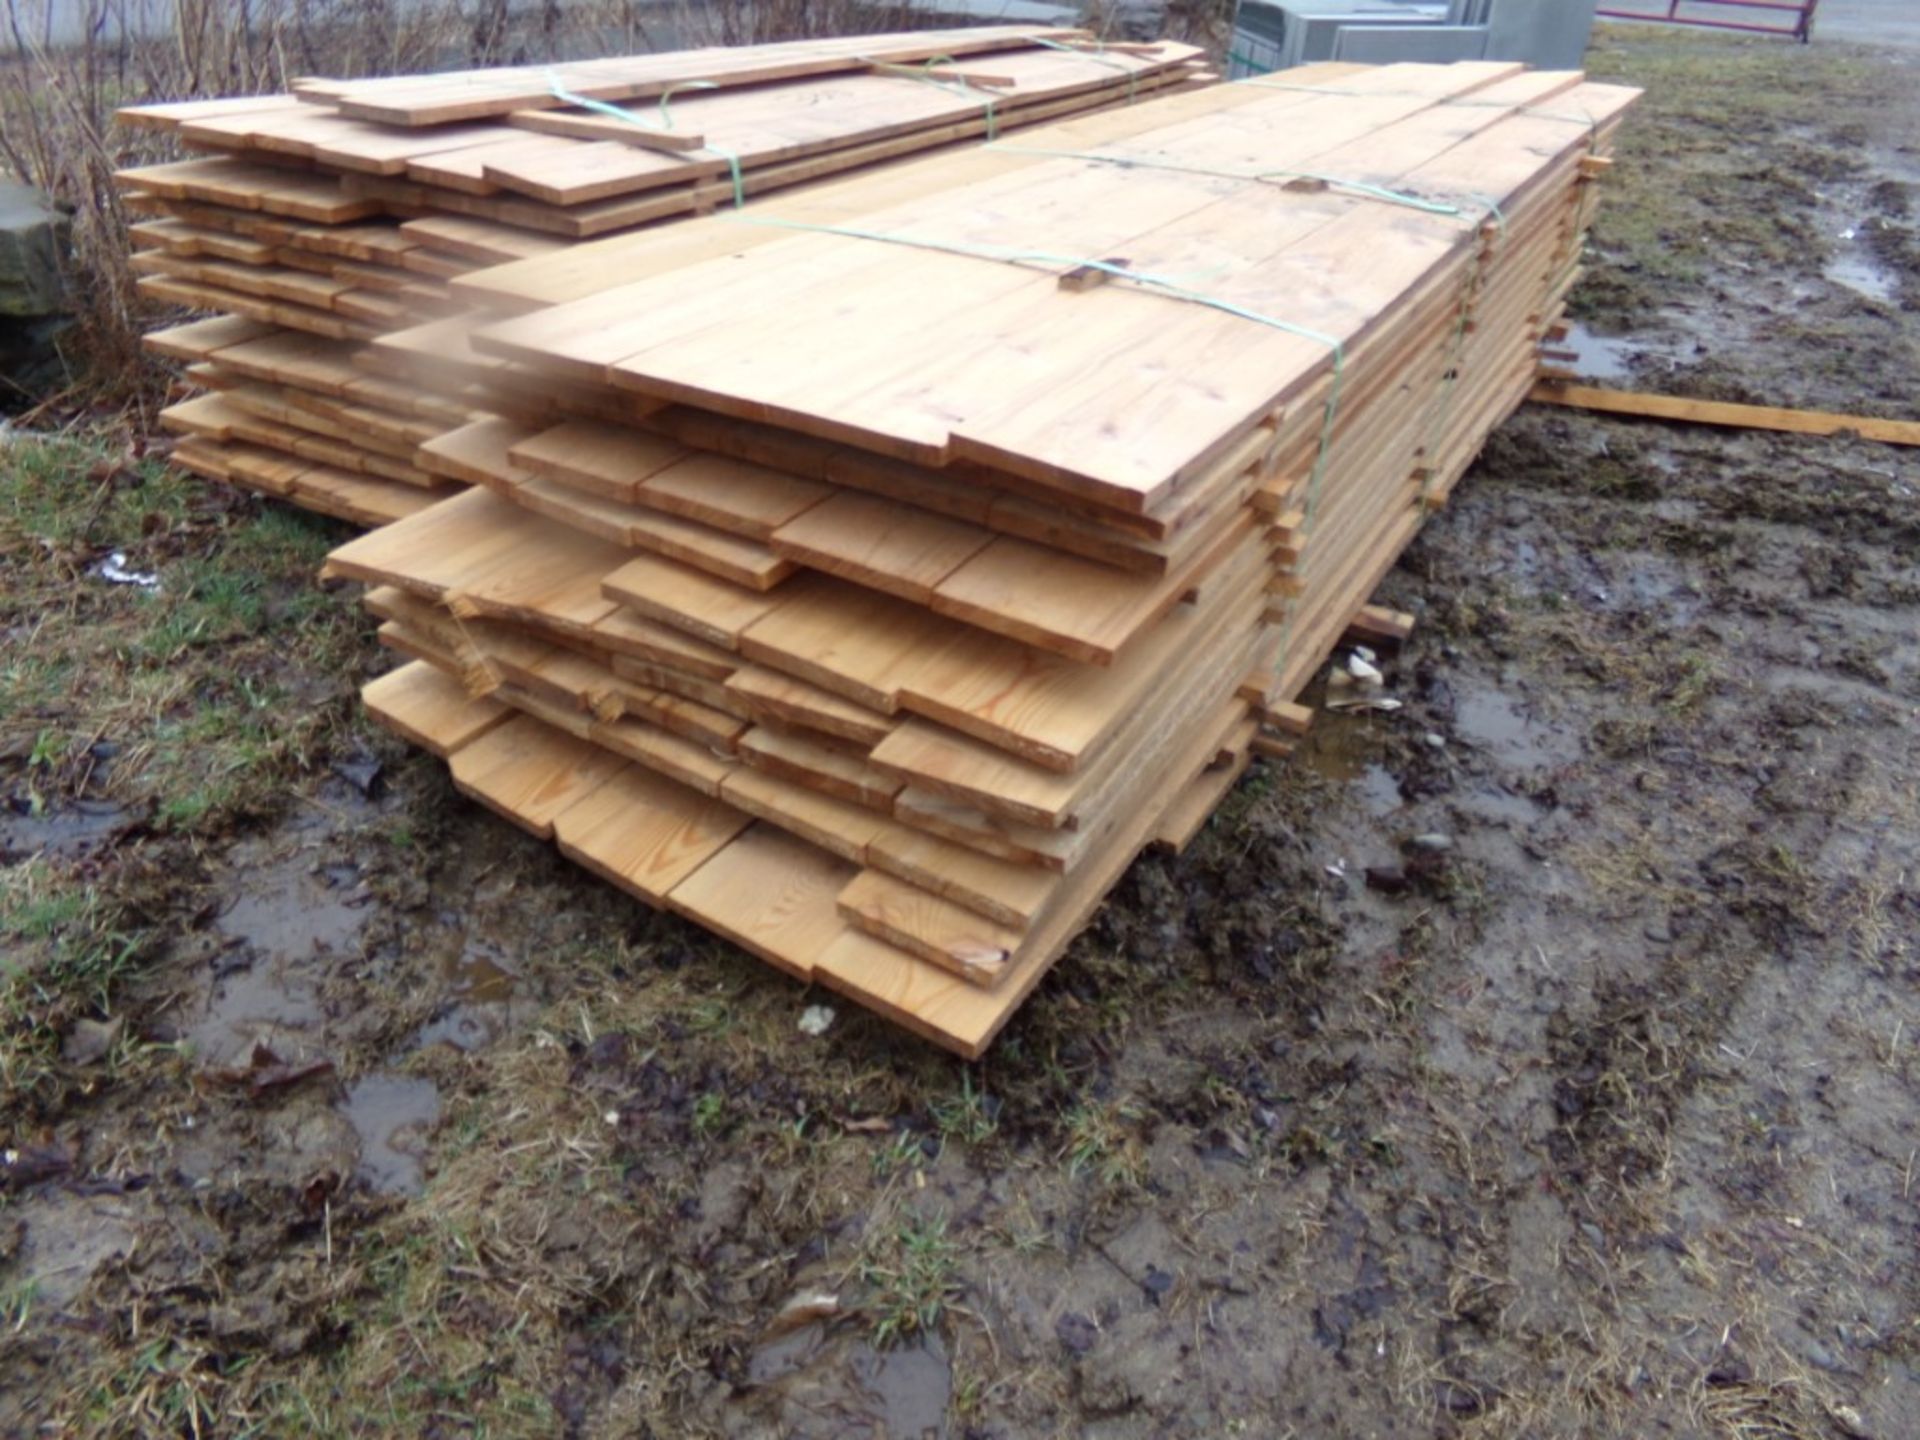 528 Board Feet Of 1'' Rough-Cut Lumber, Assorted Simensions,Sold By The Board (528 X BID PRICE) - Image 2 of 2